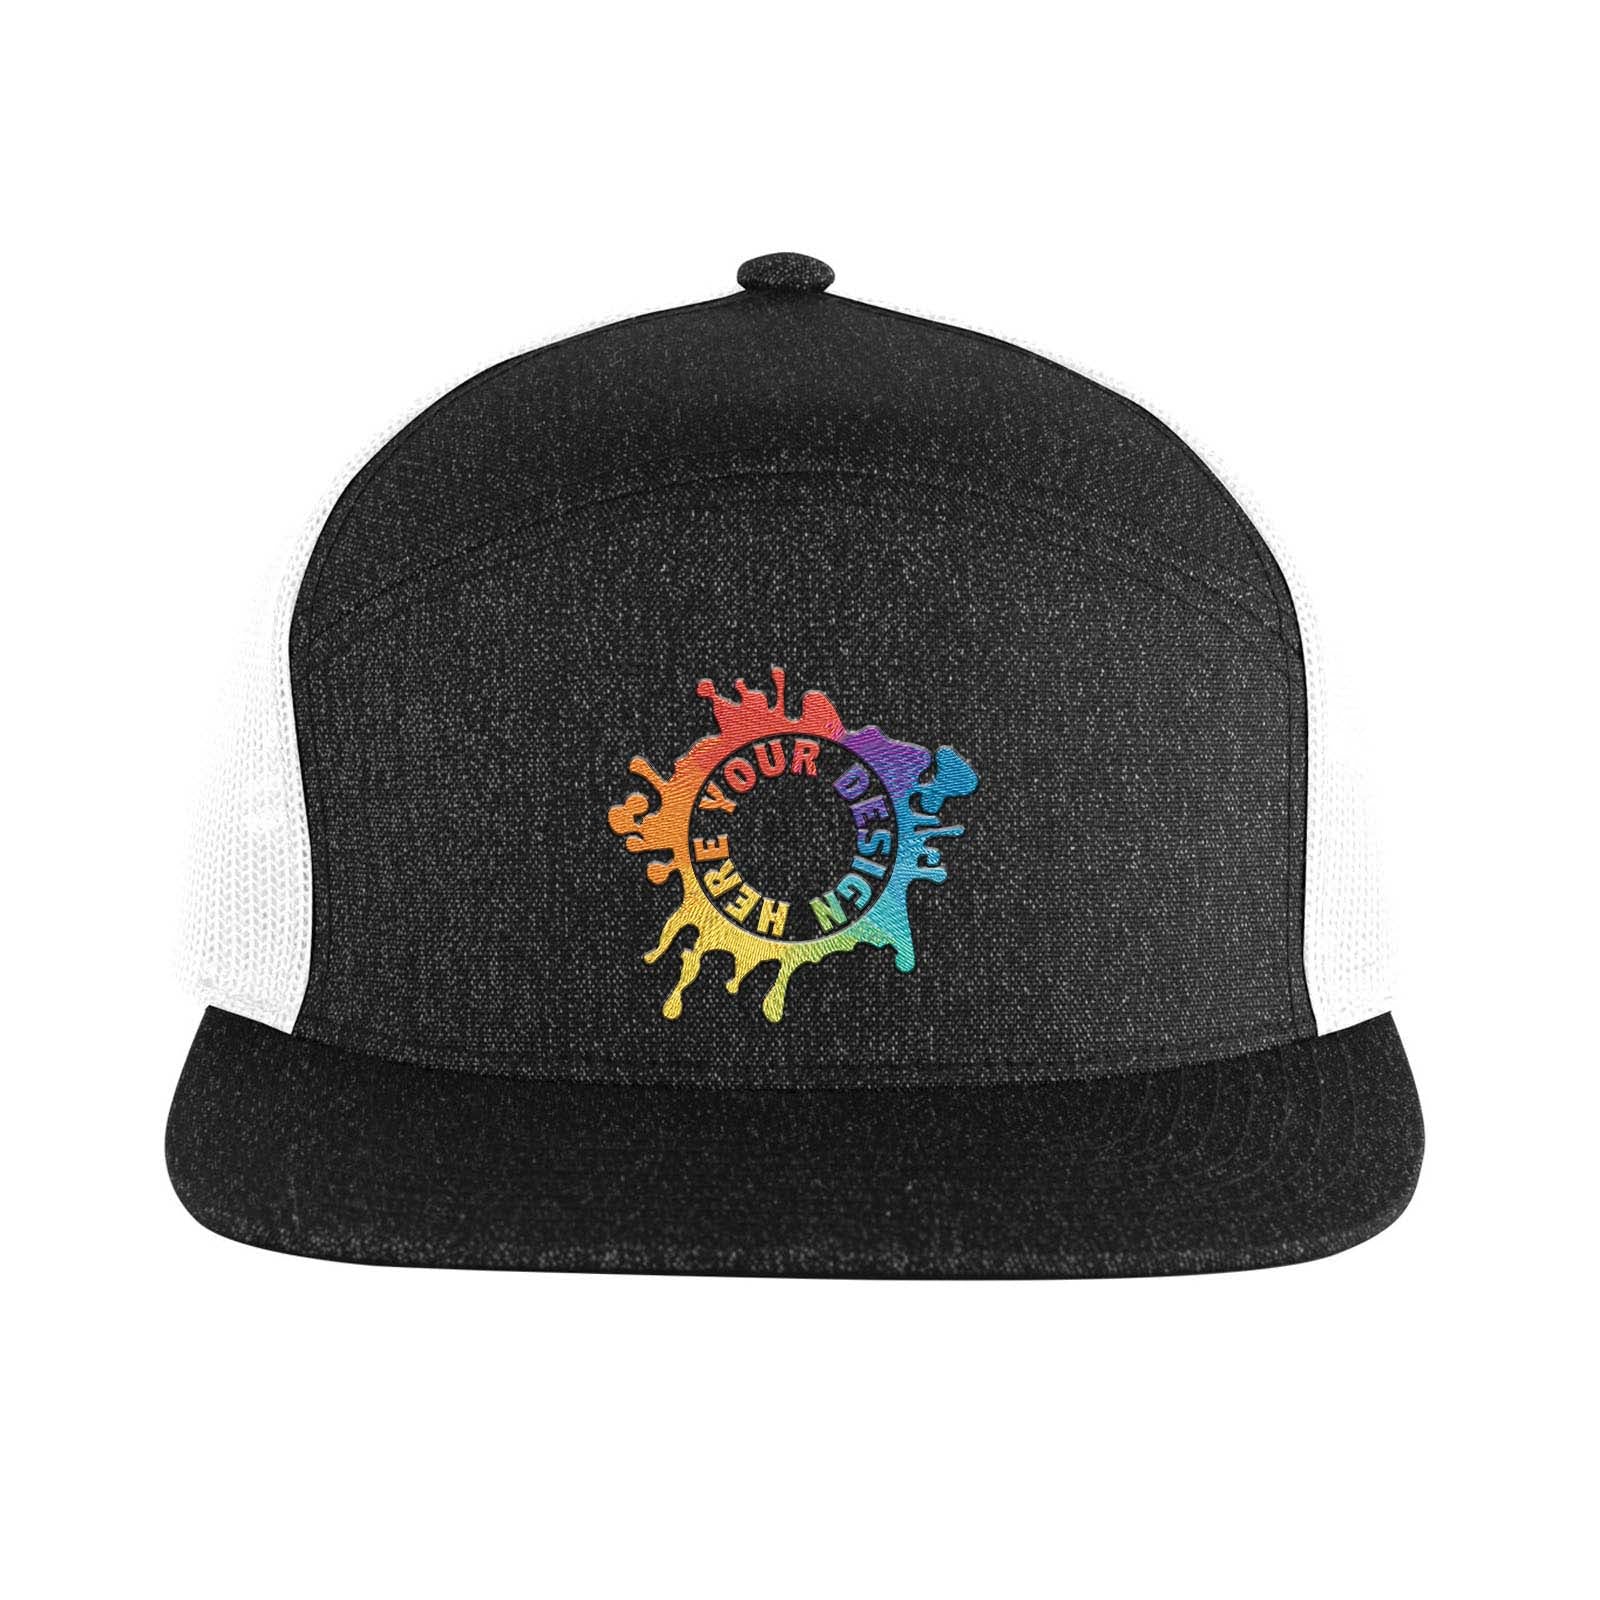 Embroidered Pacific Headwear Heathered 6-Panel Arch Trucker Snapback Cap | Flex Caps